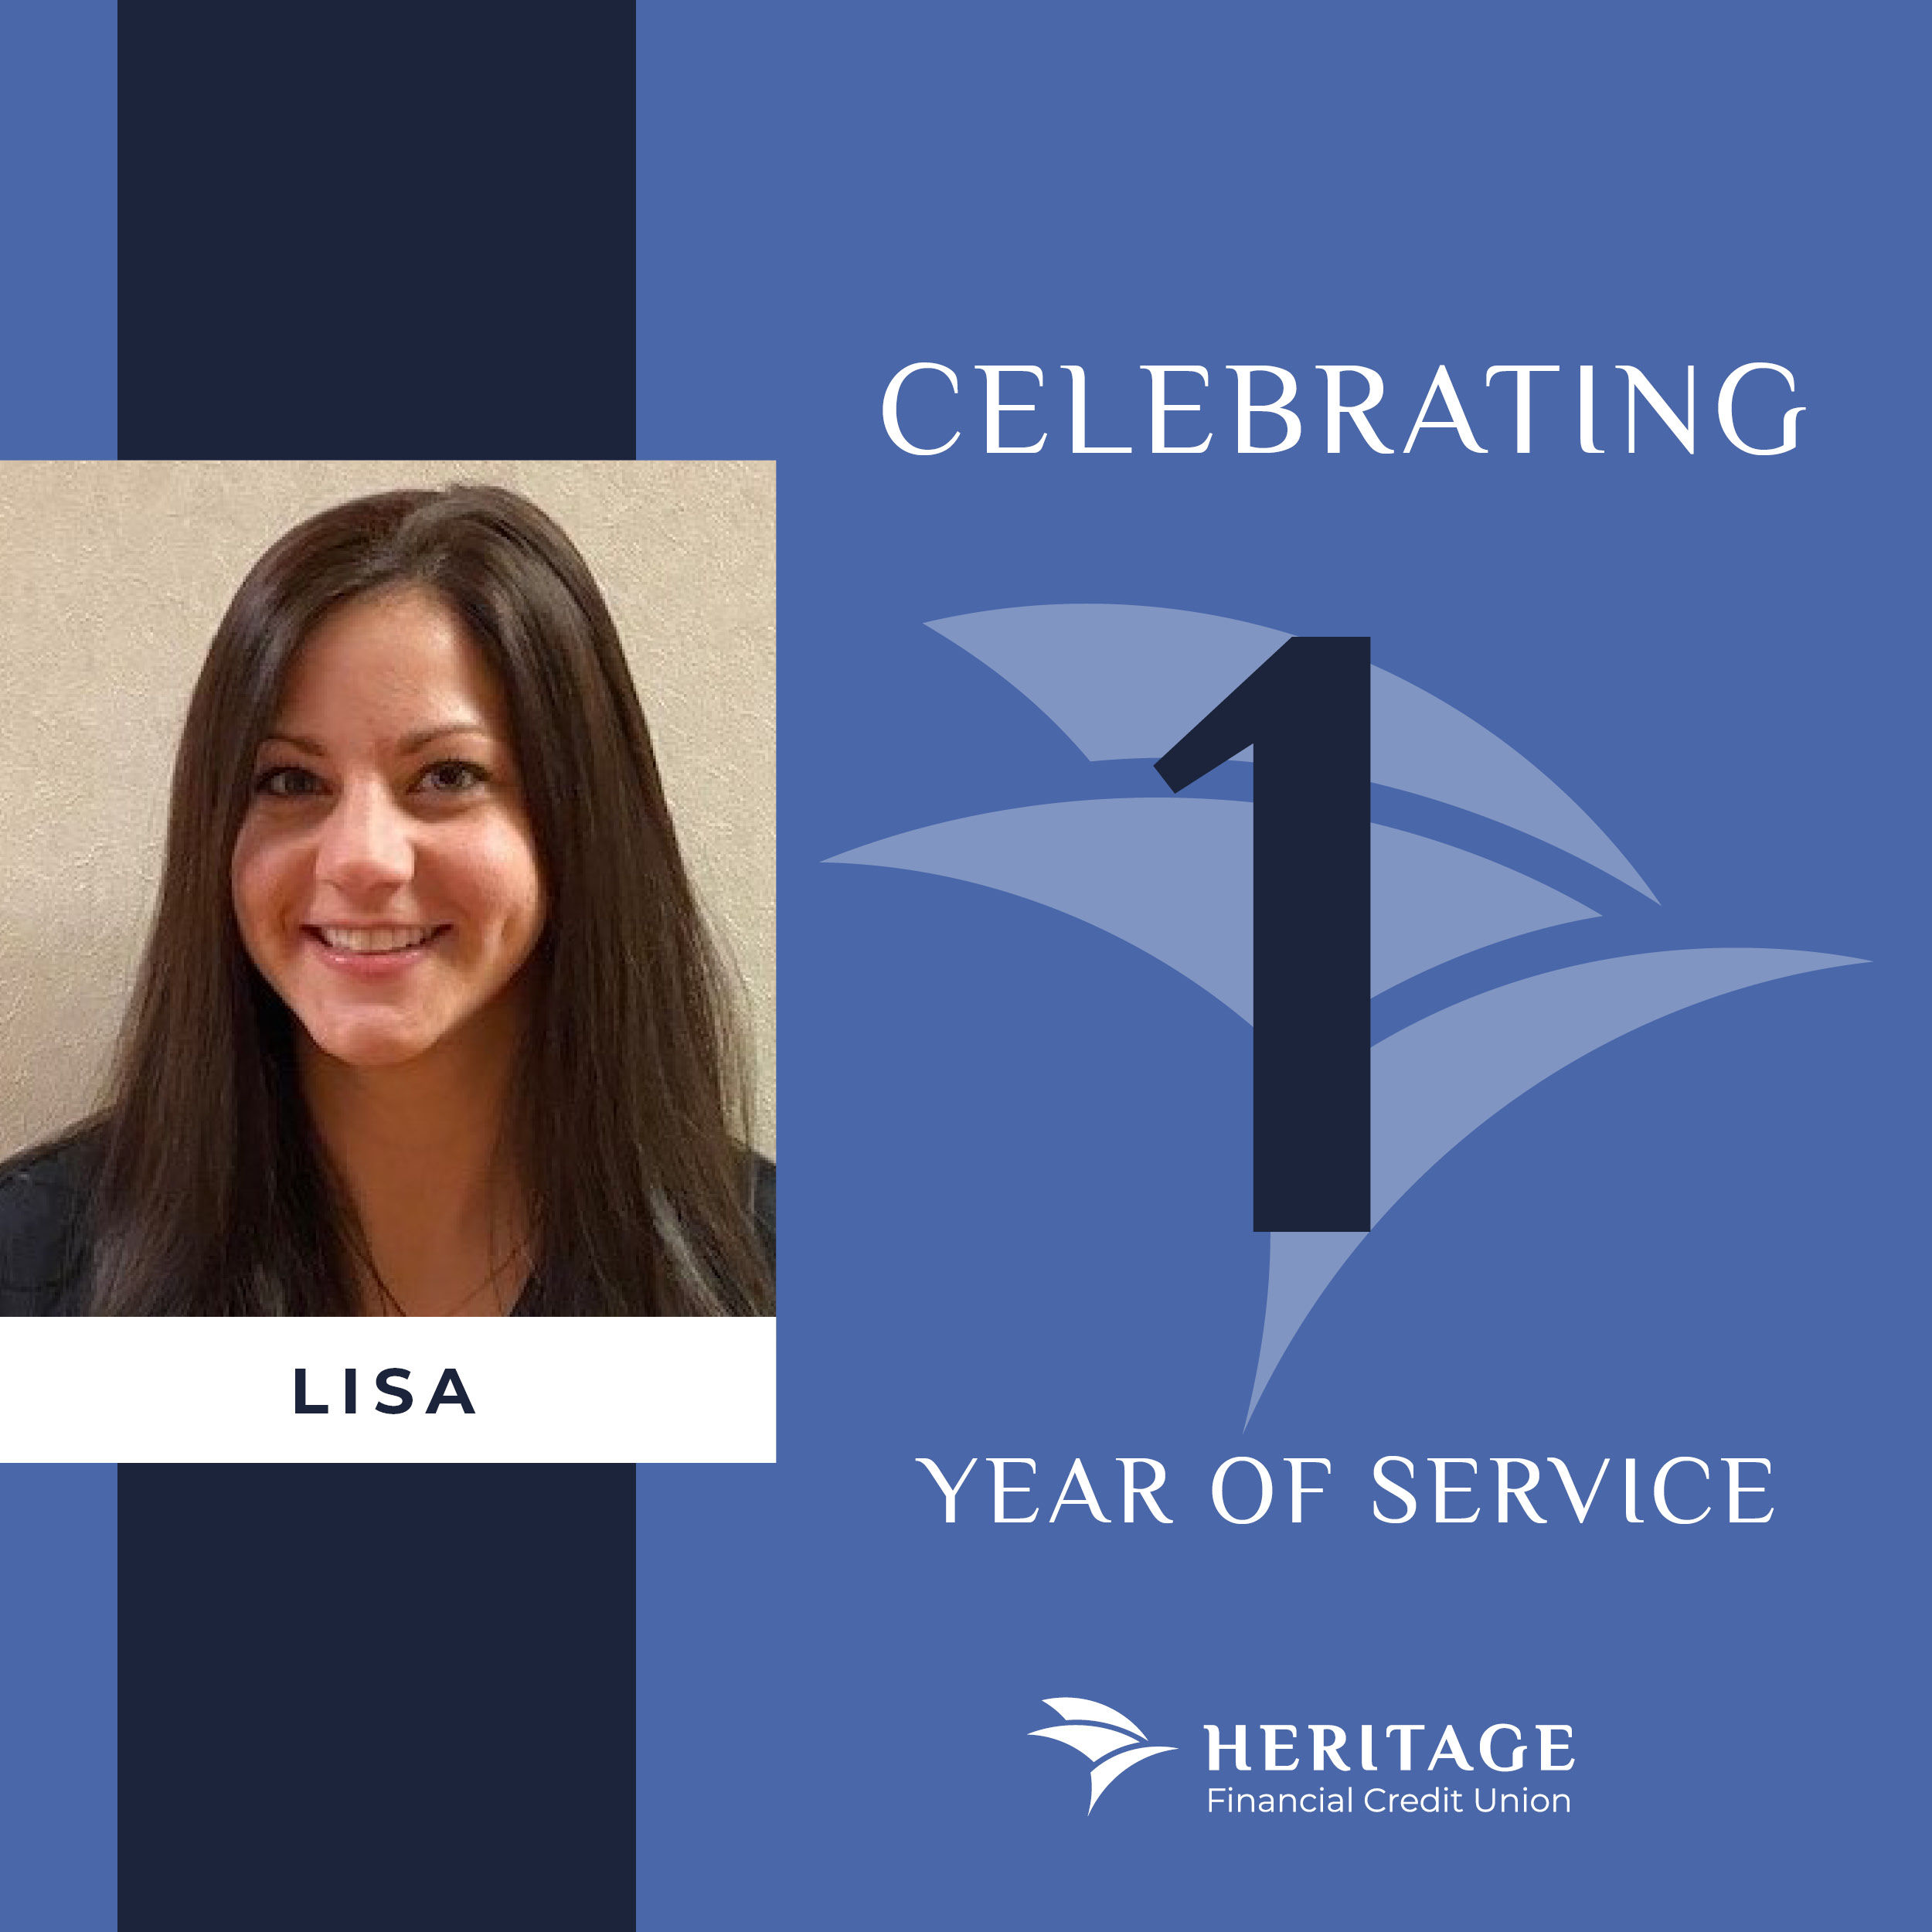 Happy Anniversary!

Please join us in celebrating Lisa on her first year of service at Heritage Financial Credit Union.

Thank you for your hard work, passion and dedication in your first year with us. We can’t wait to see all of the great things you will accomplish in the years ahead with our credit union!

